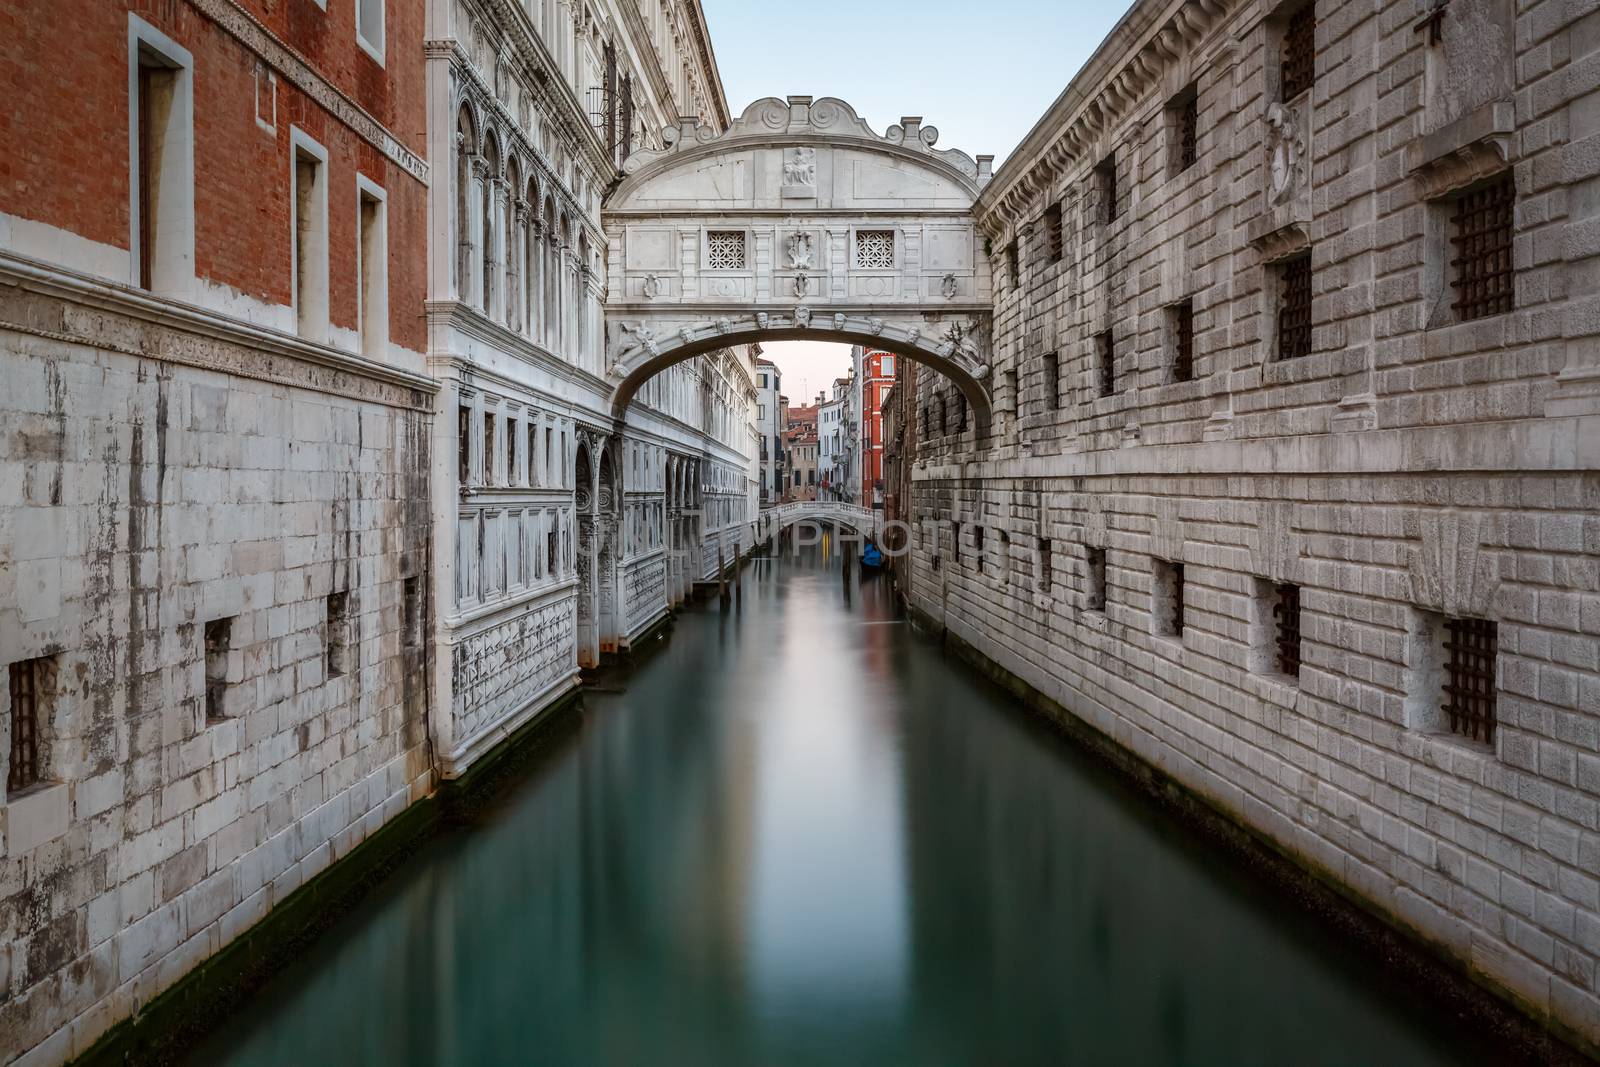 Bridge of Sighs and Doge's Palace in Venice, Italy by anshar